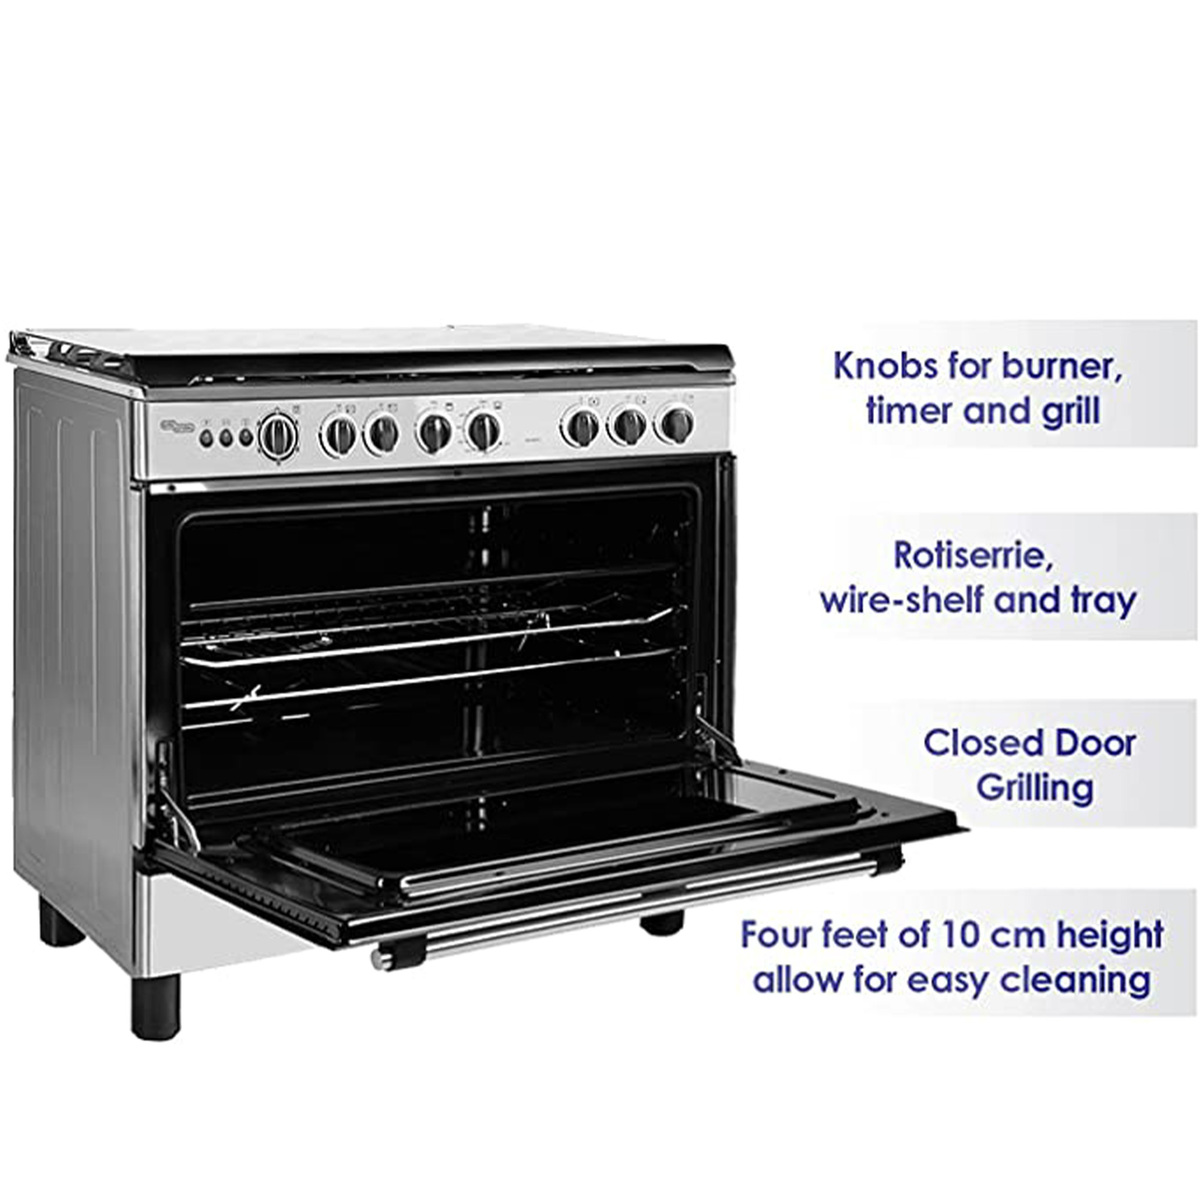 Super General, Gas Cooking Range, 5 Gas Burners, 90x60 cm, Stainless Steel, SGC 901 FS